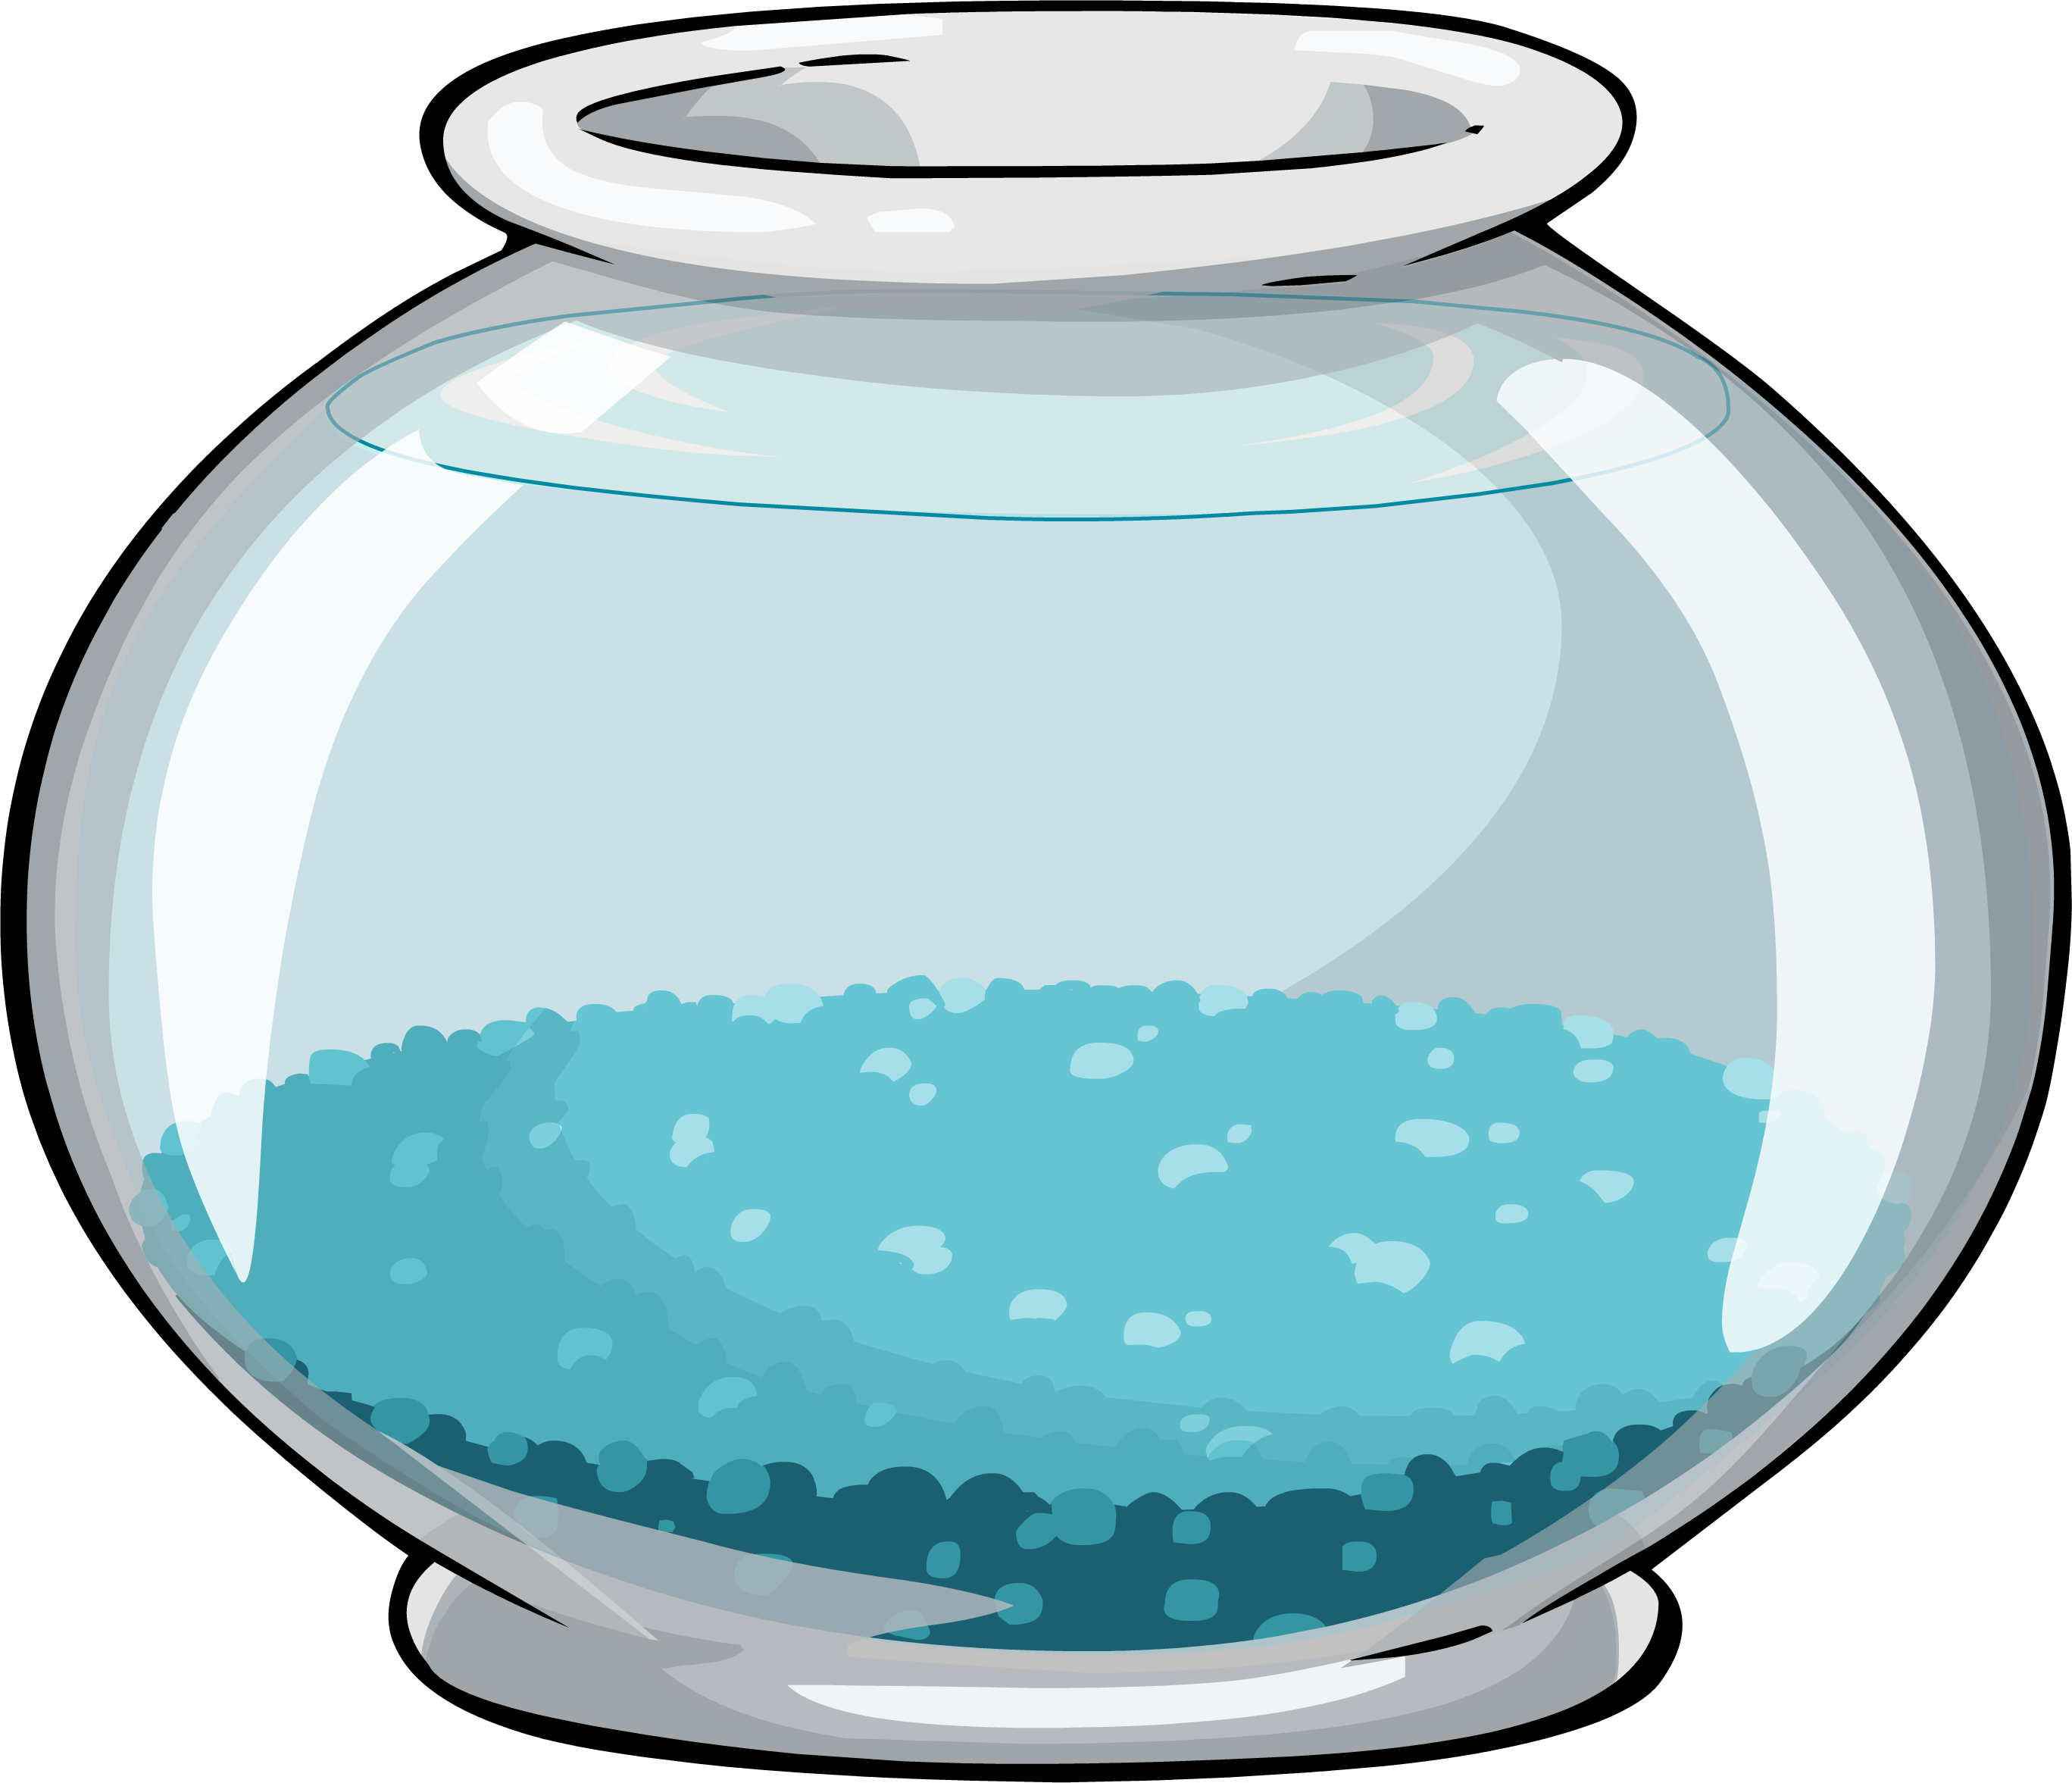 Fish Bowl Picture - Fishbowl Png (2735x2353)